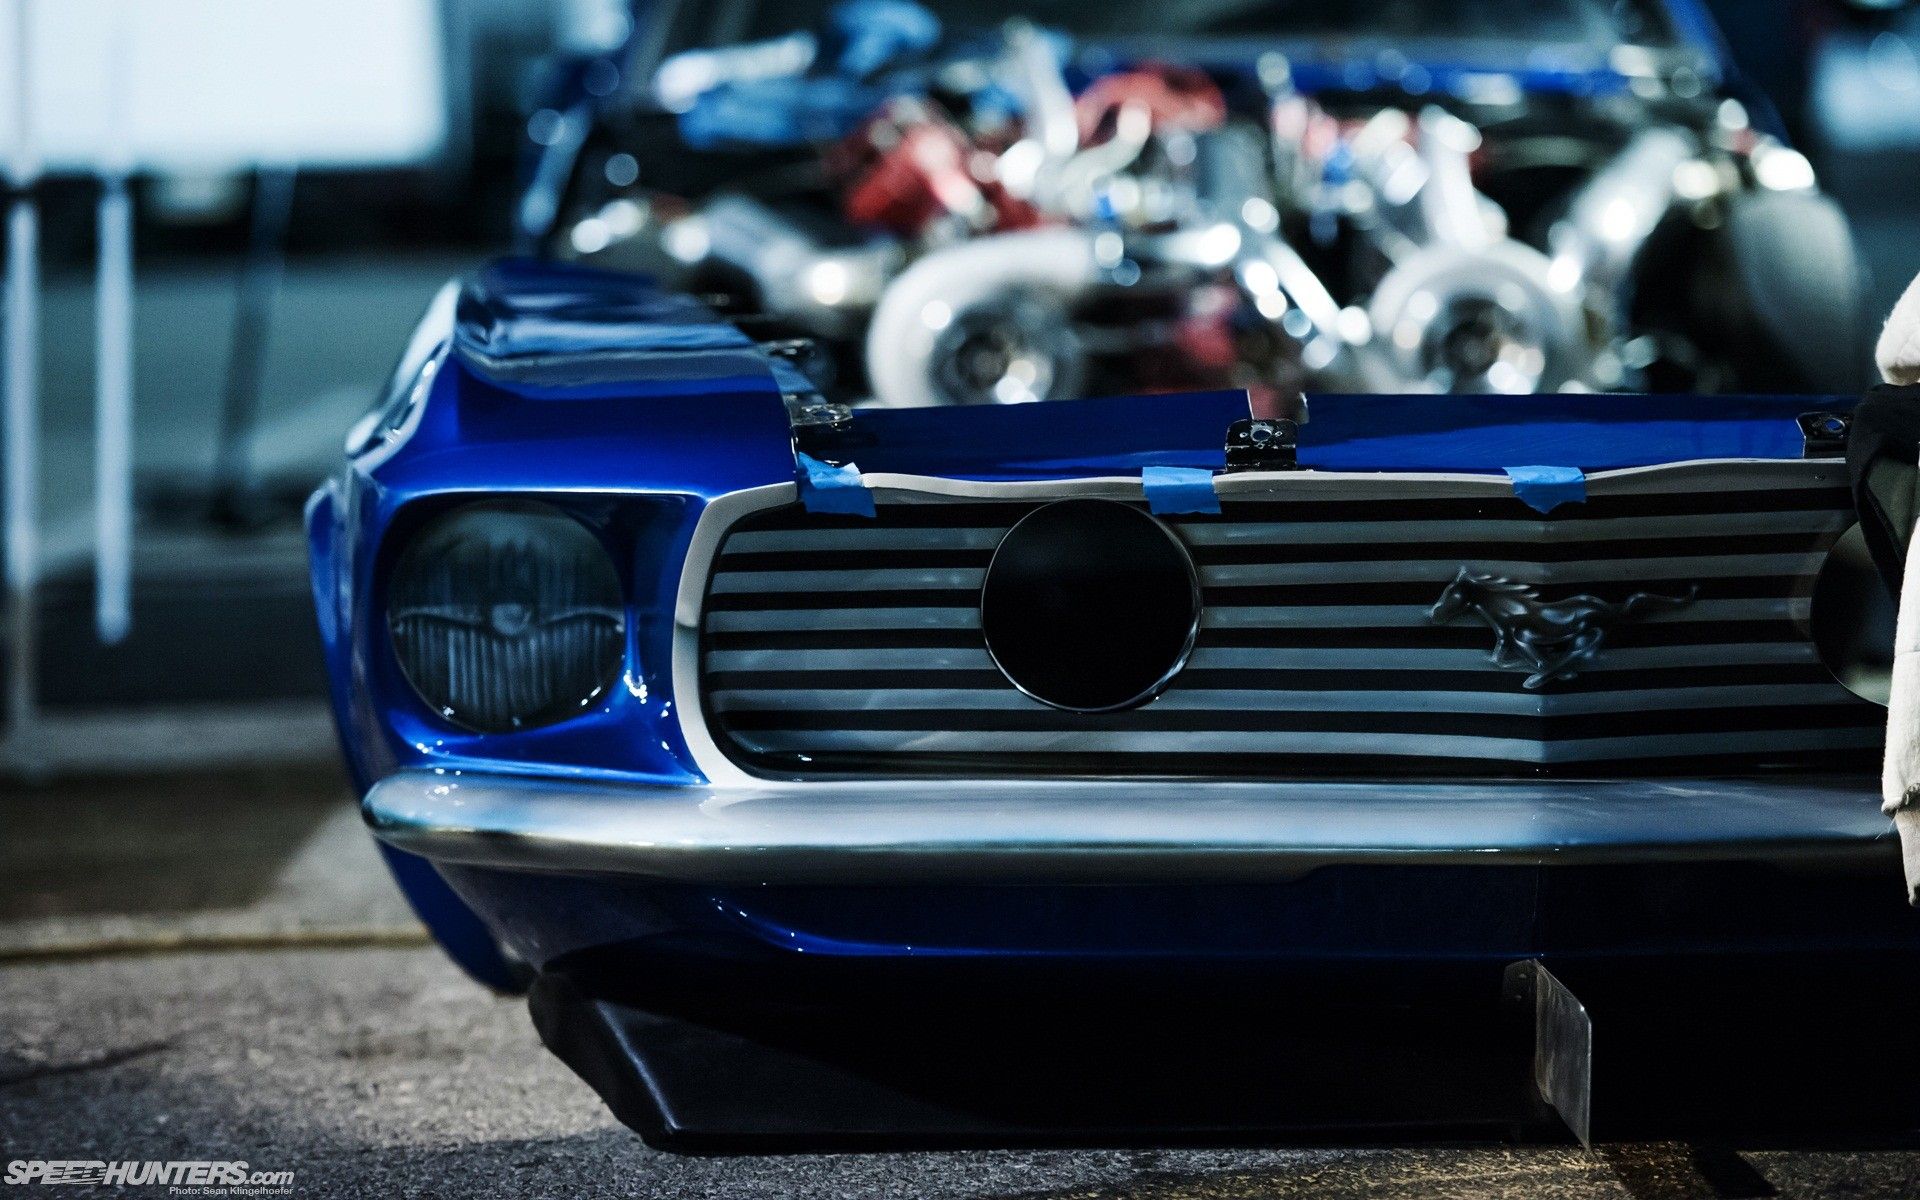 Speddhunters ford mustang shelby vehicle cars hot rod muscle engine nitro turbo front blue chrome drag racing race wallpaperx1200